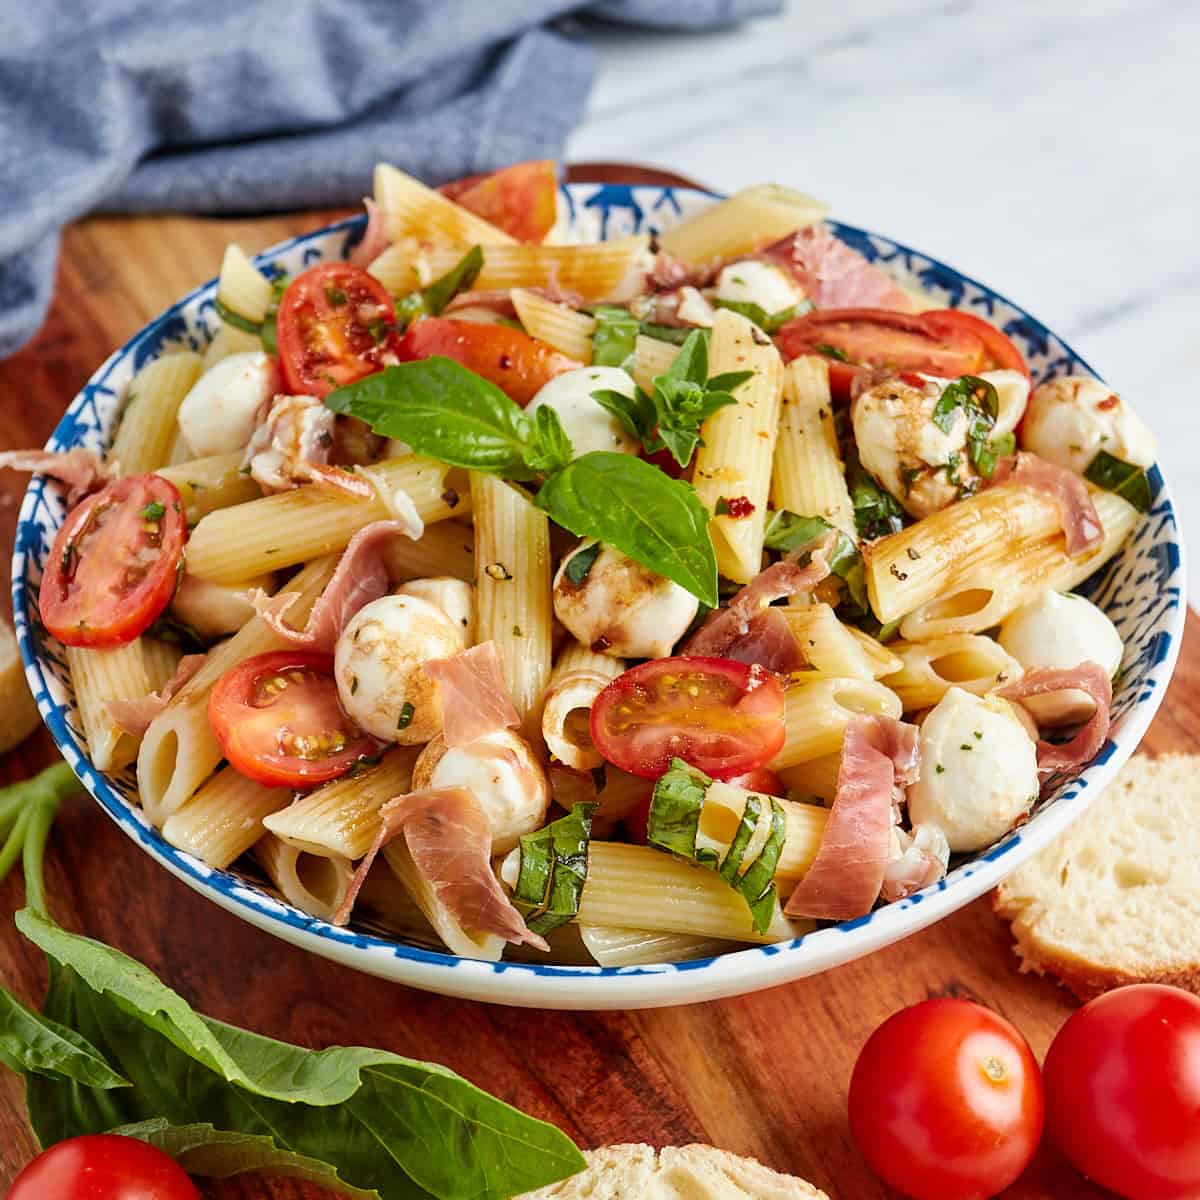 caprese pasta salad in a bowl with sliced bread and tomatoes on the side